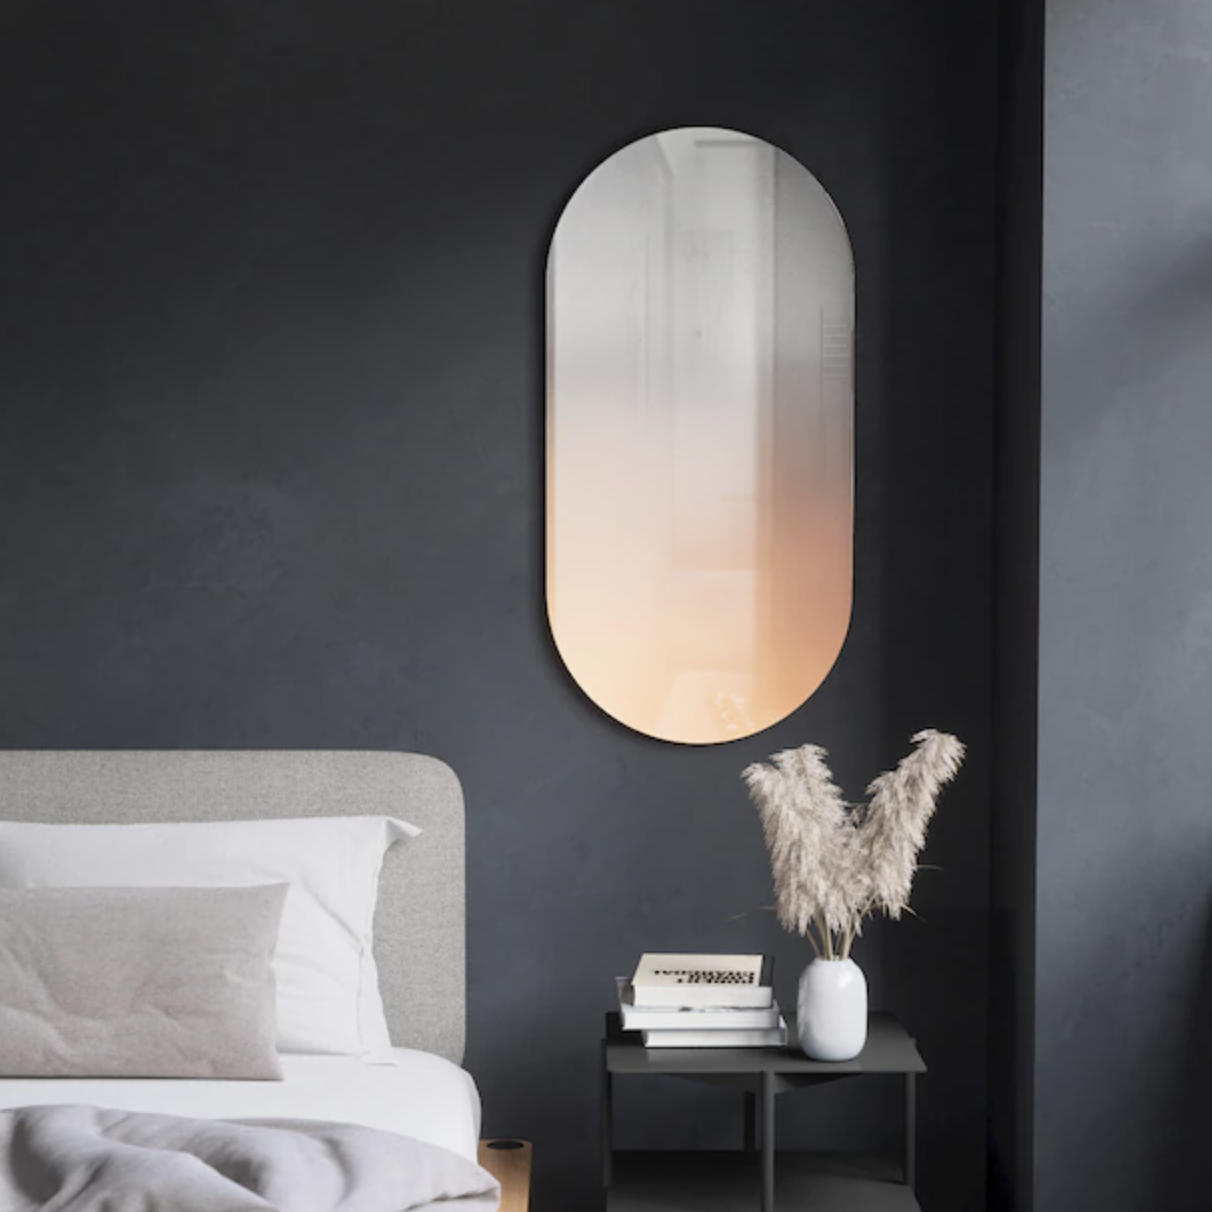 the ombre oval mirror mounted on a wall